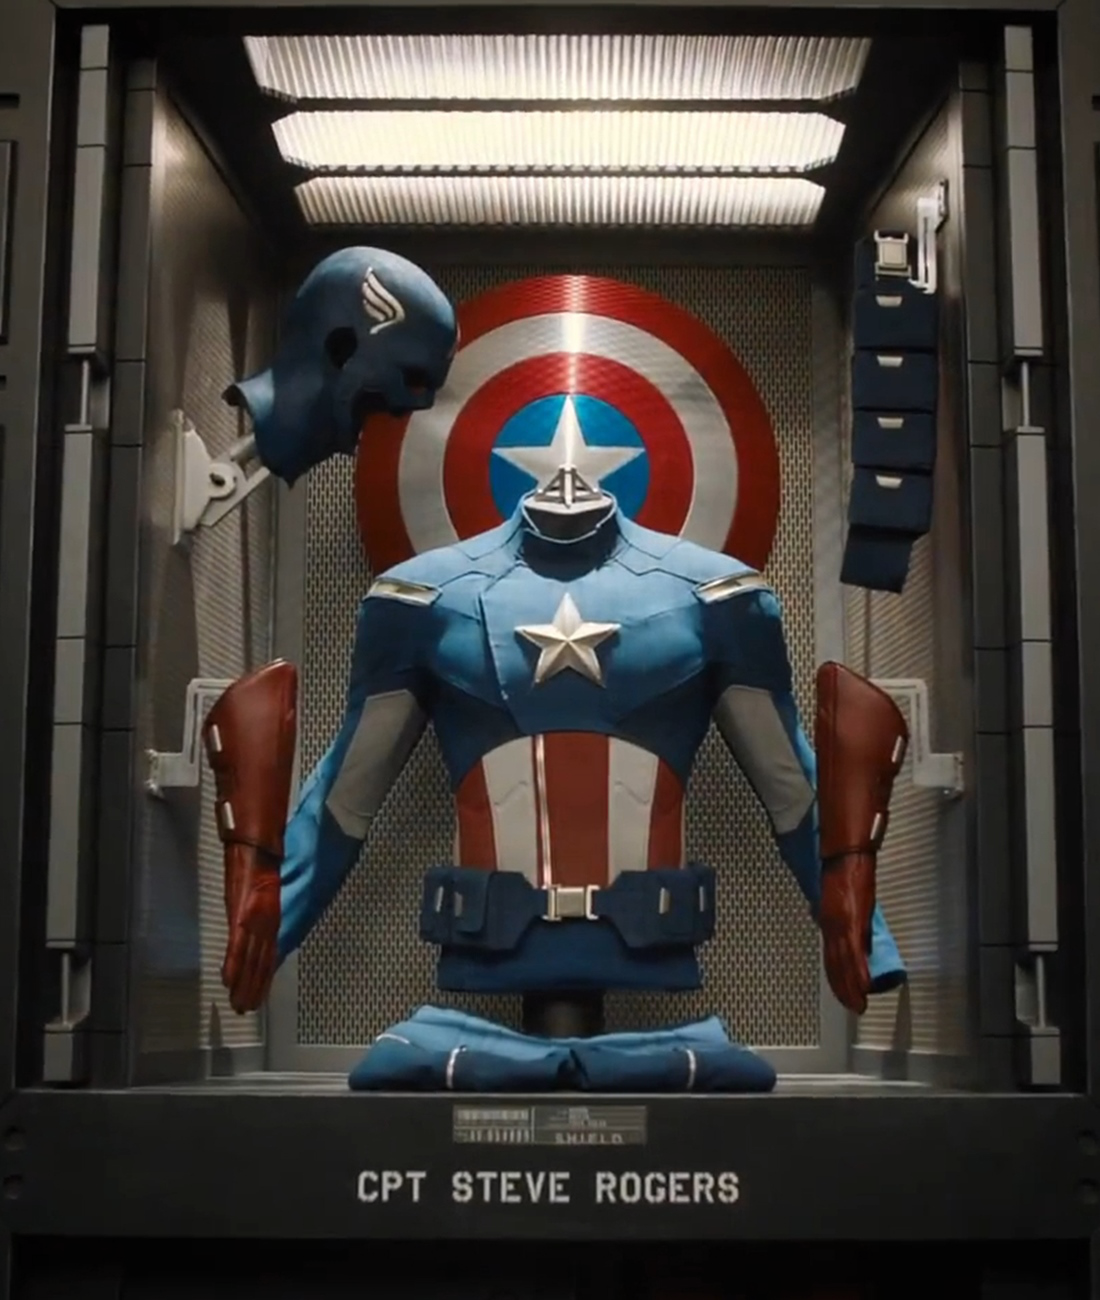 https://static.wikia.nocookie.net/marvelcinematicuniverse/images/4/40/Cap%27s_Uniform.png/revision/latest?cb=20141214075735